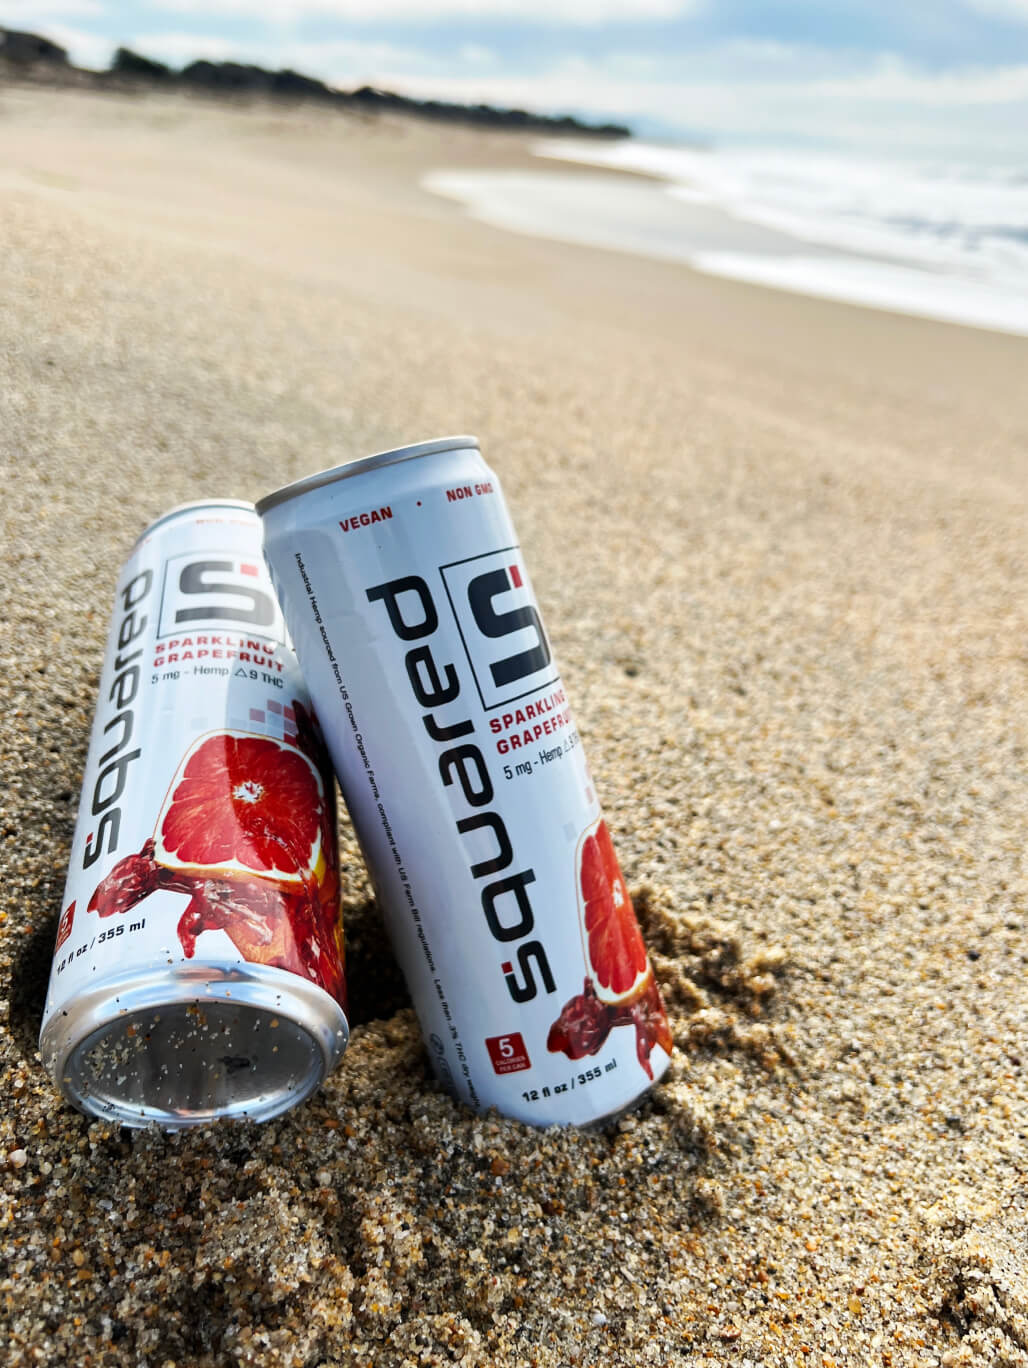 Two 12 ounce cans of Sparkling Grapefruit by Squared in the sand